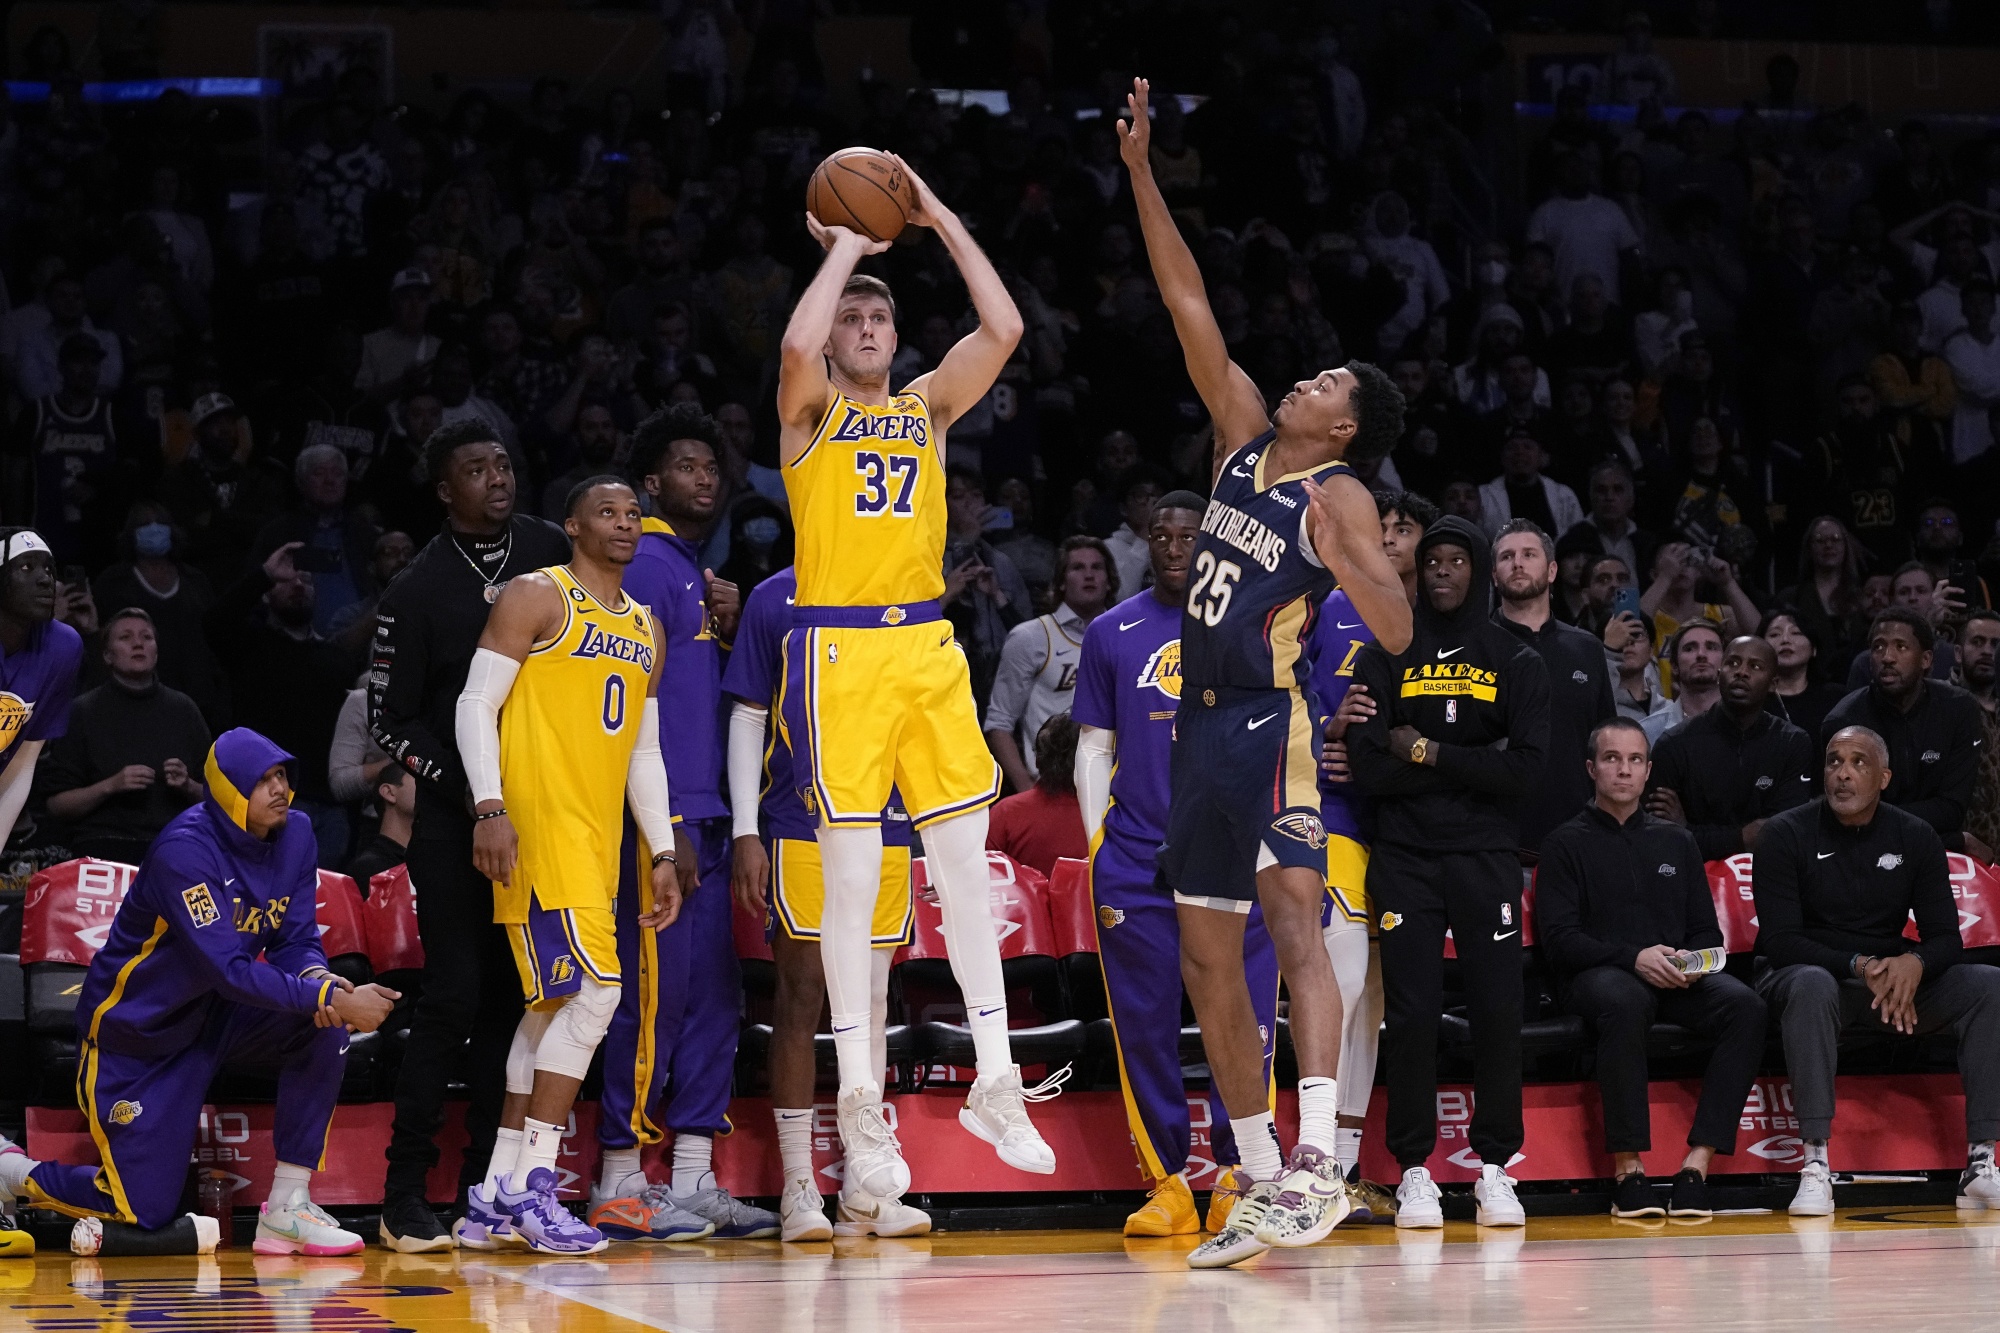 Ryan forces OT, Lakers rally for 120-117 win over Pelicans - The